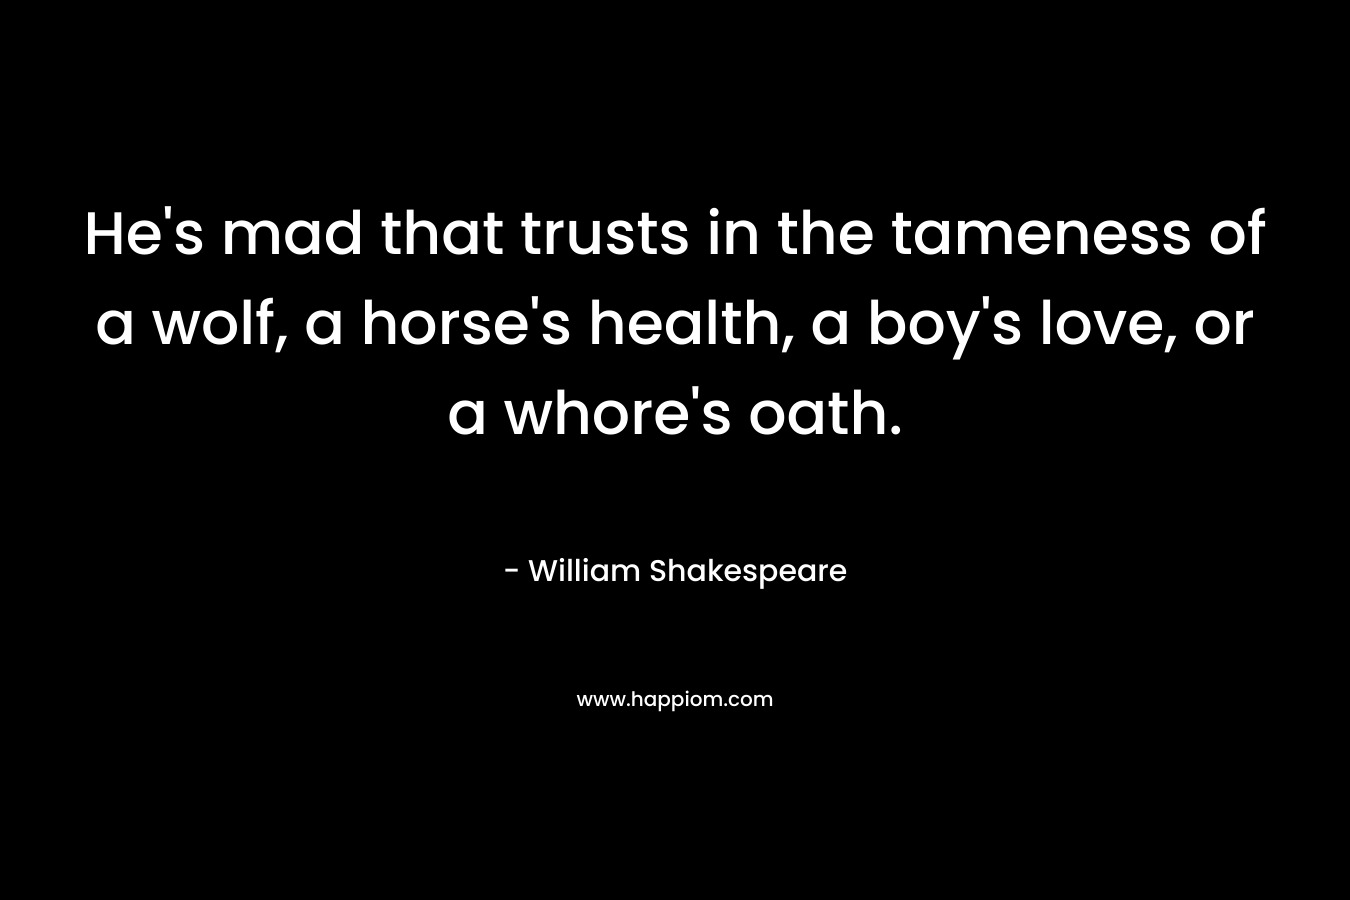 He’s mad that trusts in the tameness of a wolf, a horse’s health, a boy’s love, or a whore’s oath. – William Shakespeare